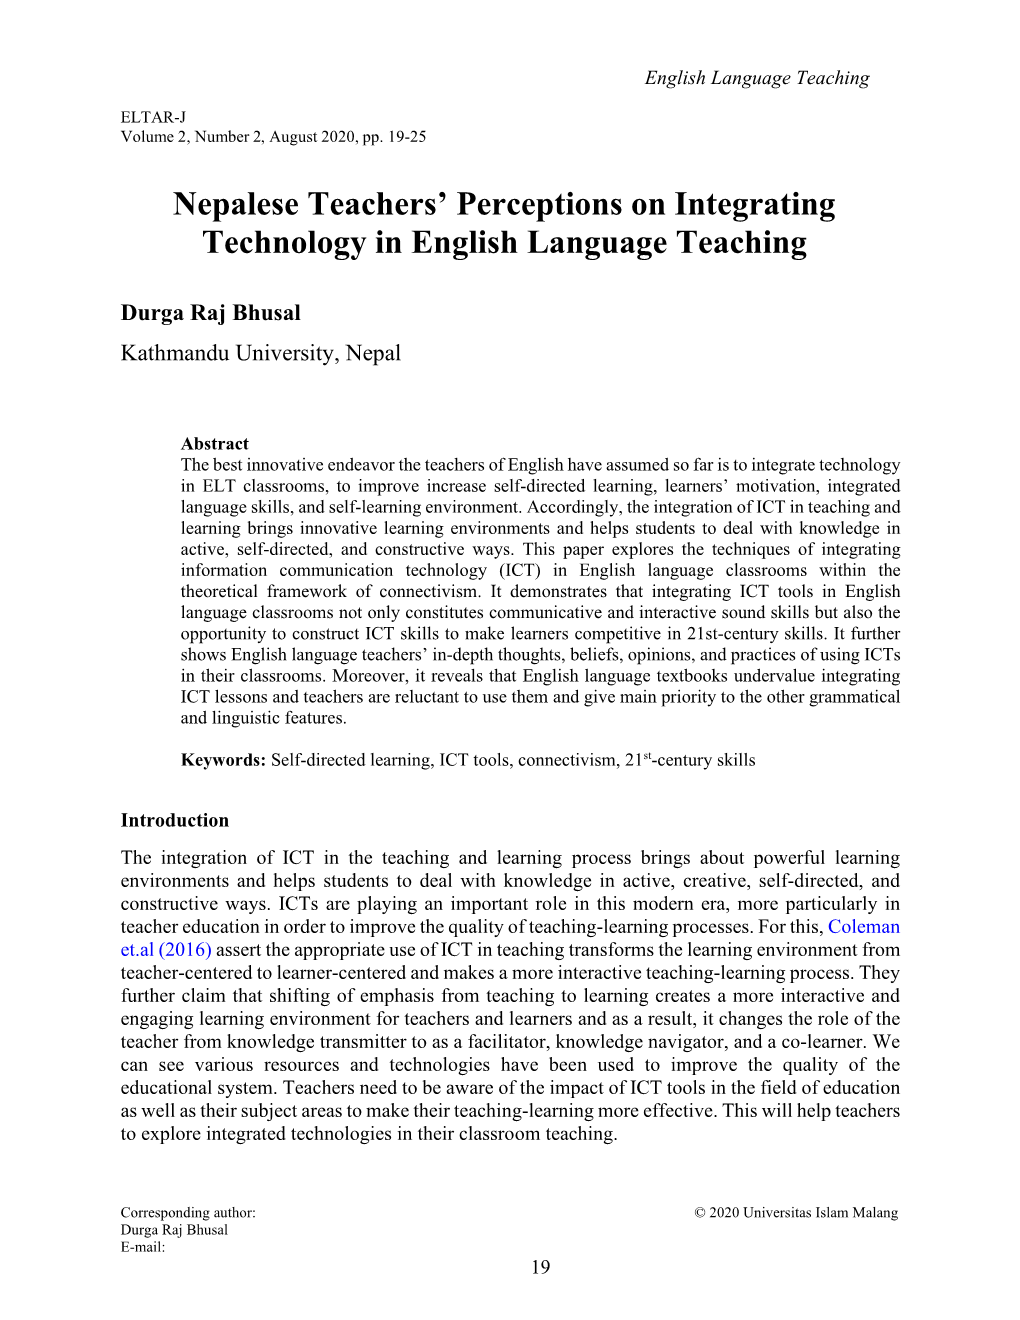 Nepalese Teachers' Perceptions on Integrating Technology in English